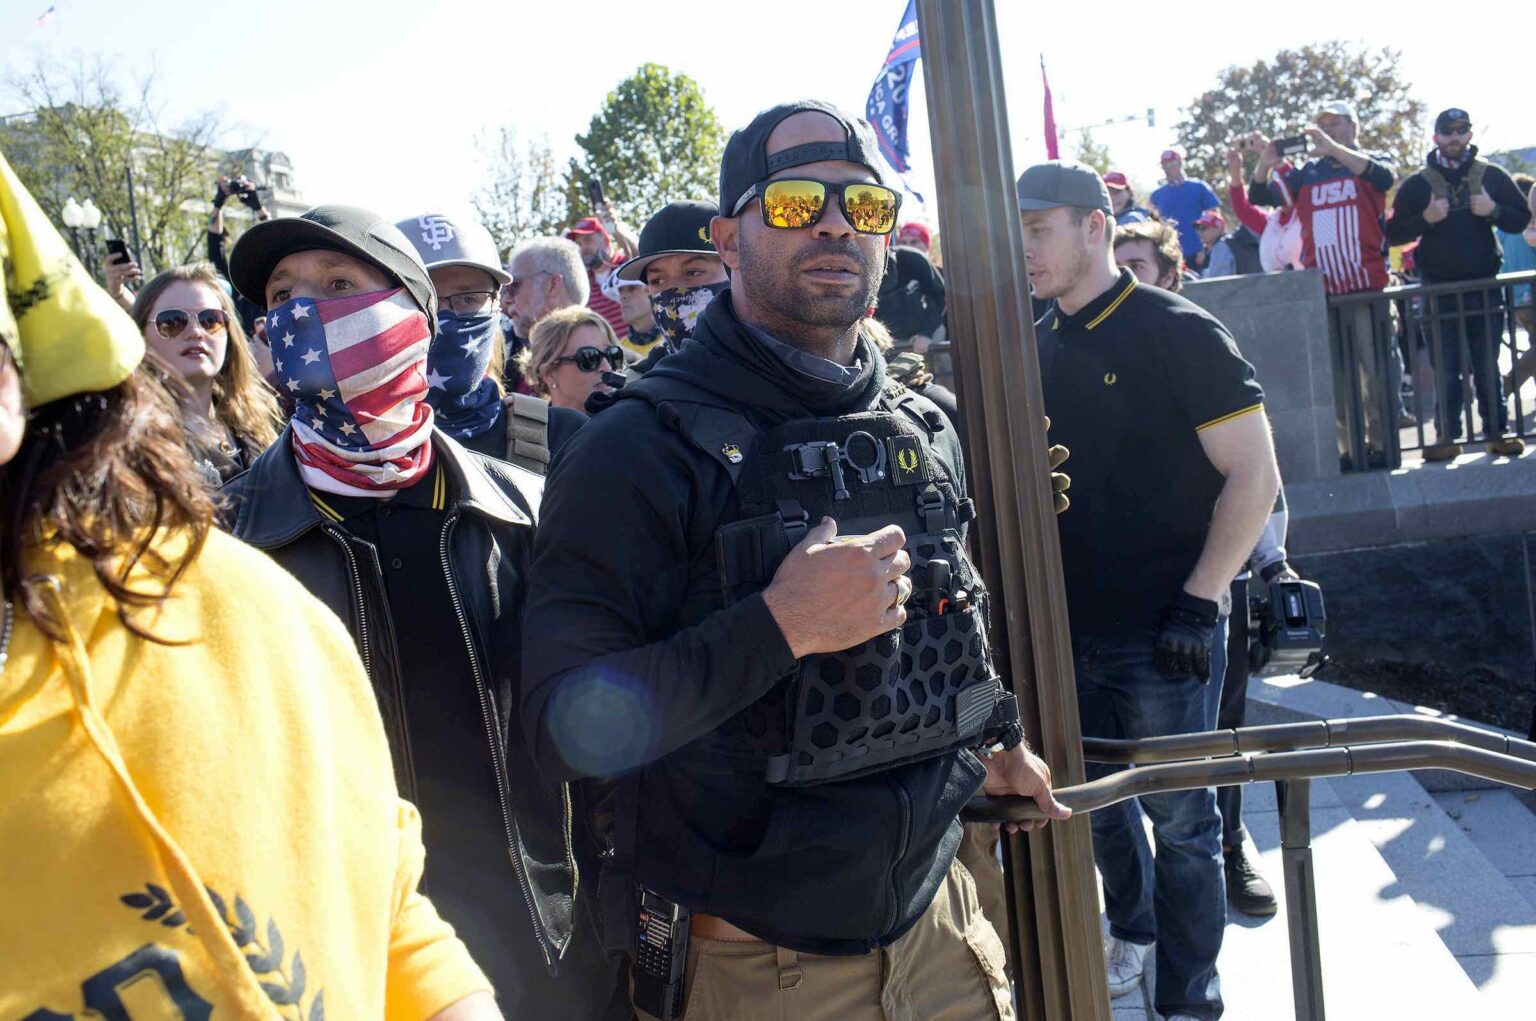 A leader of the group known as the Proud Boys was arrested in Washington D.C. Why was he arrested and why does this matter?